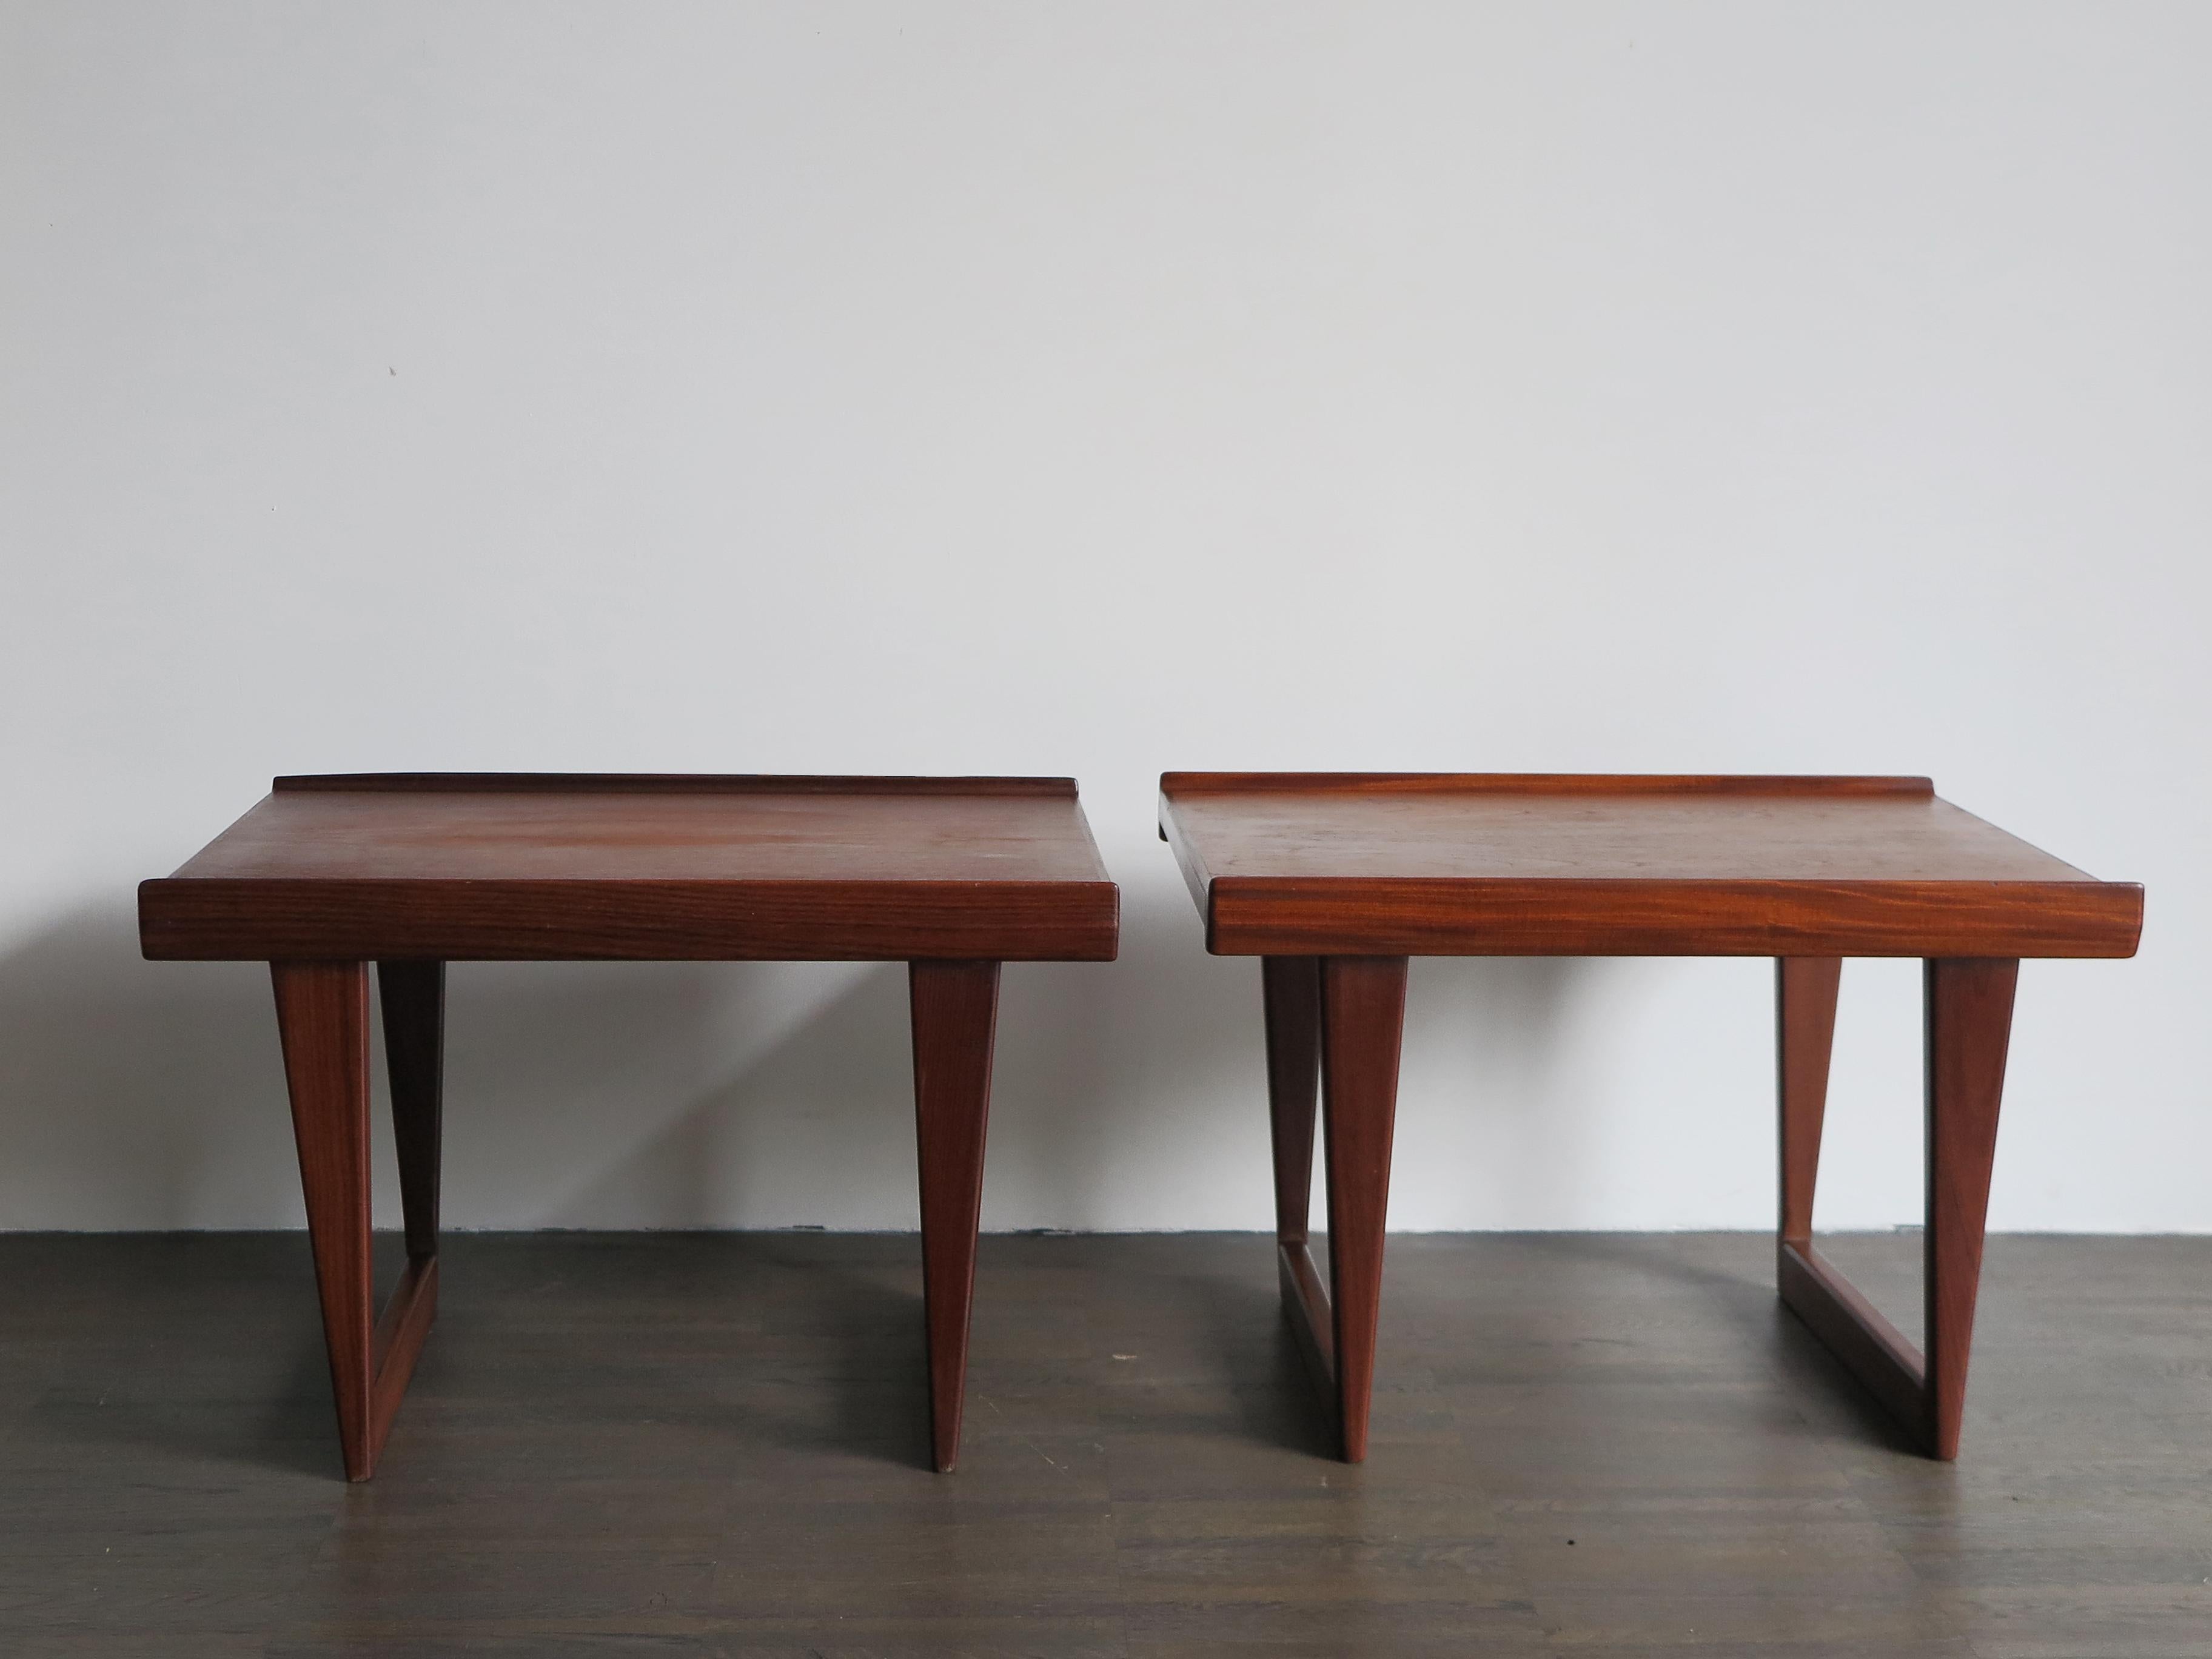 Scandinavian mid-Century modern design set of two teak coffe tables designed by Peter Løvig Nielsen, stamp under the top, Denmark circa 1950s

Please note that the items are original of the period and this shows normal signs of age and use.